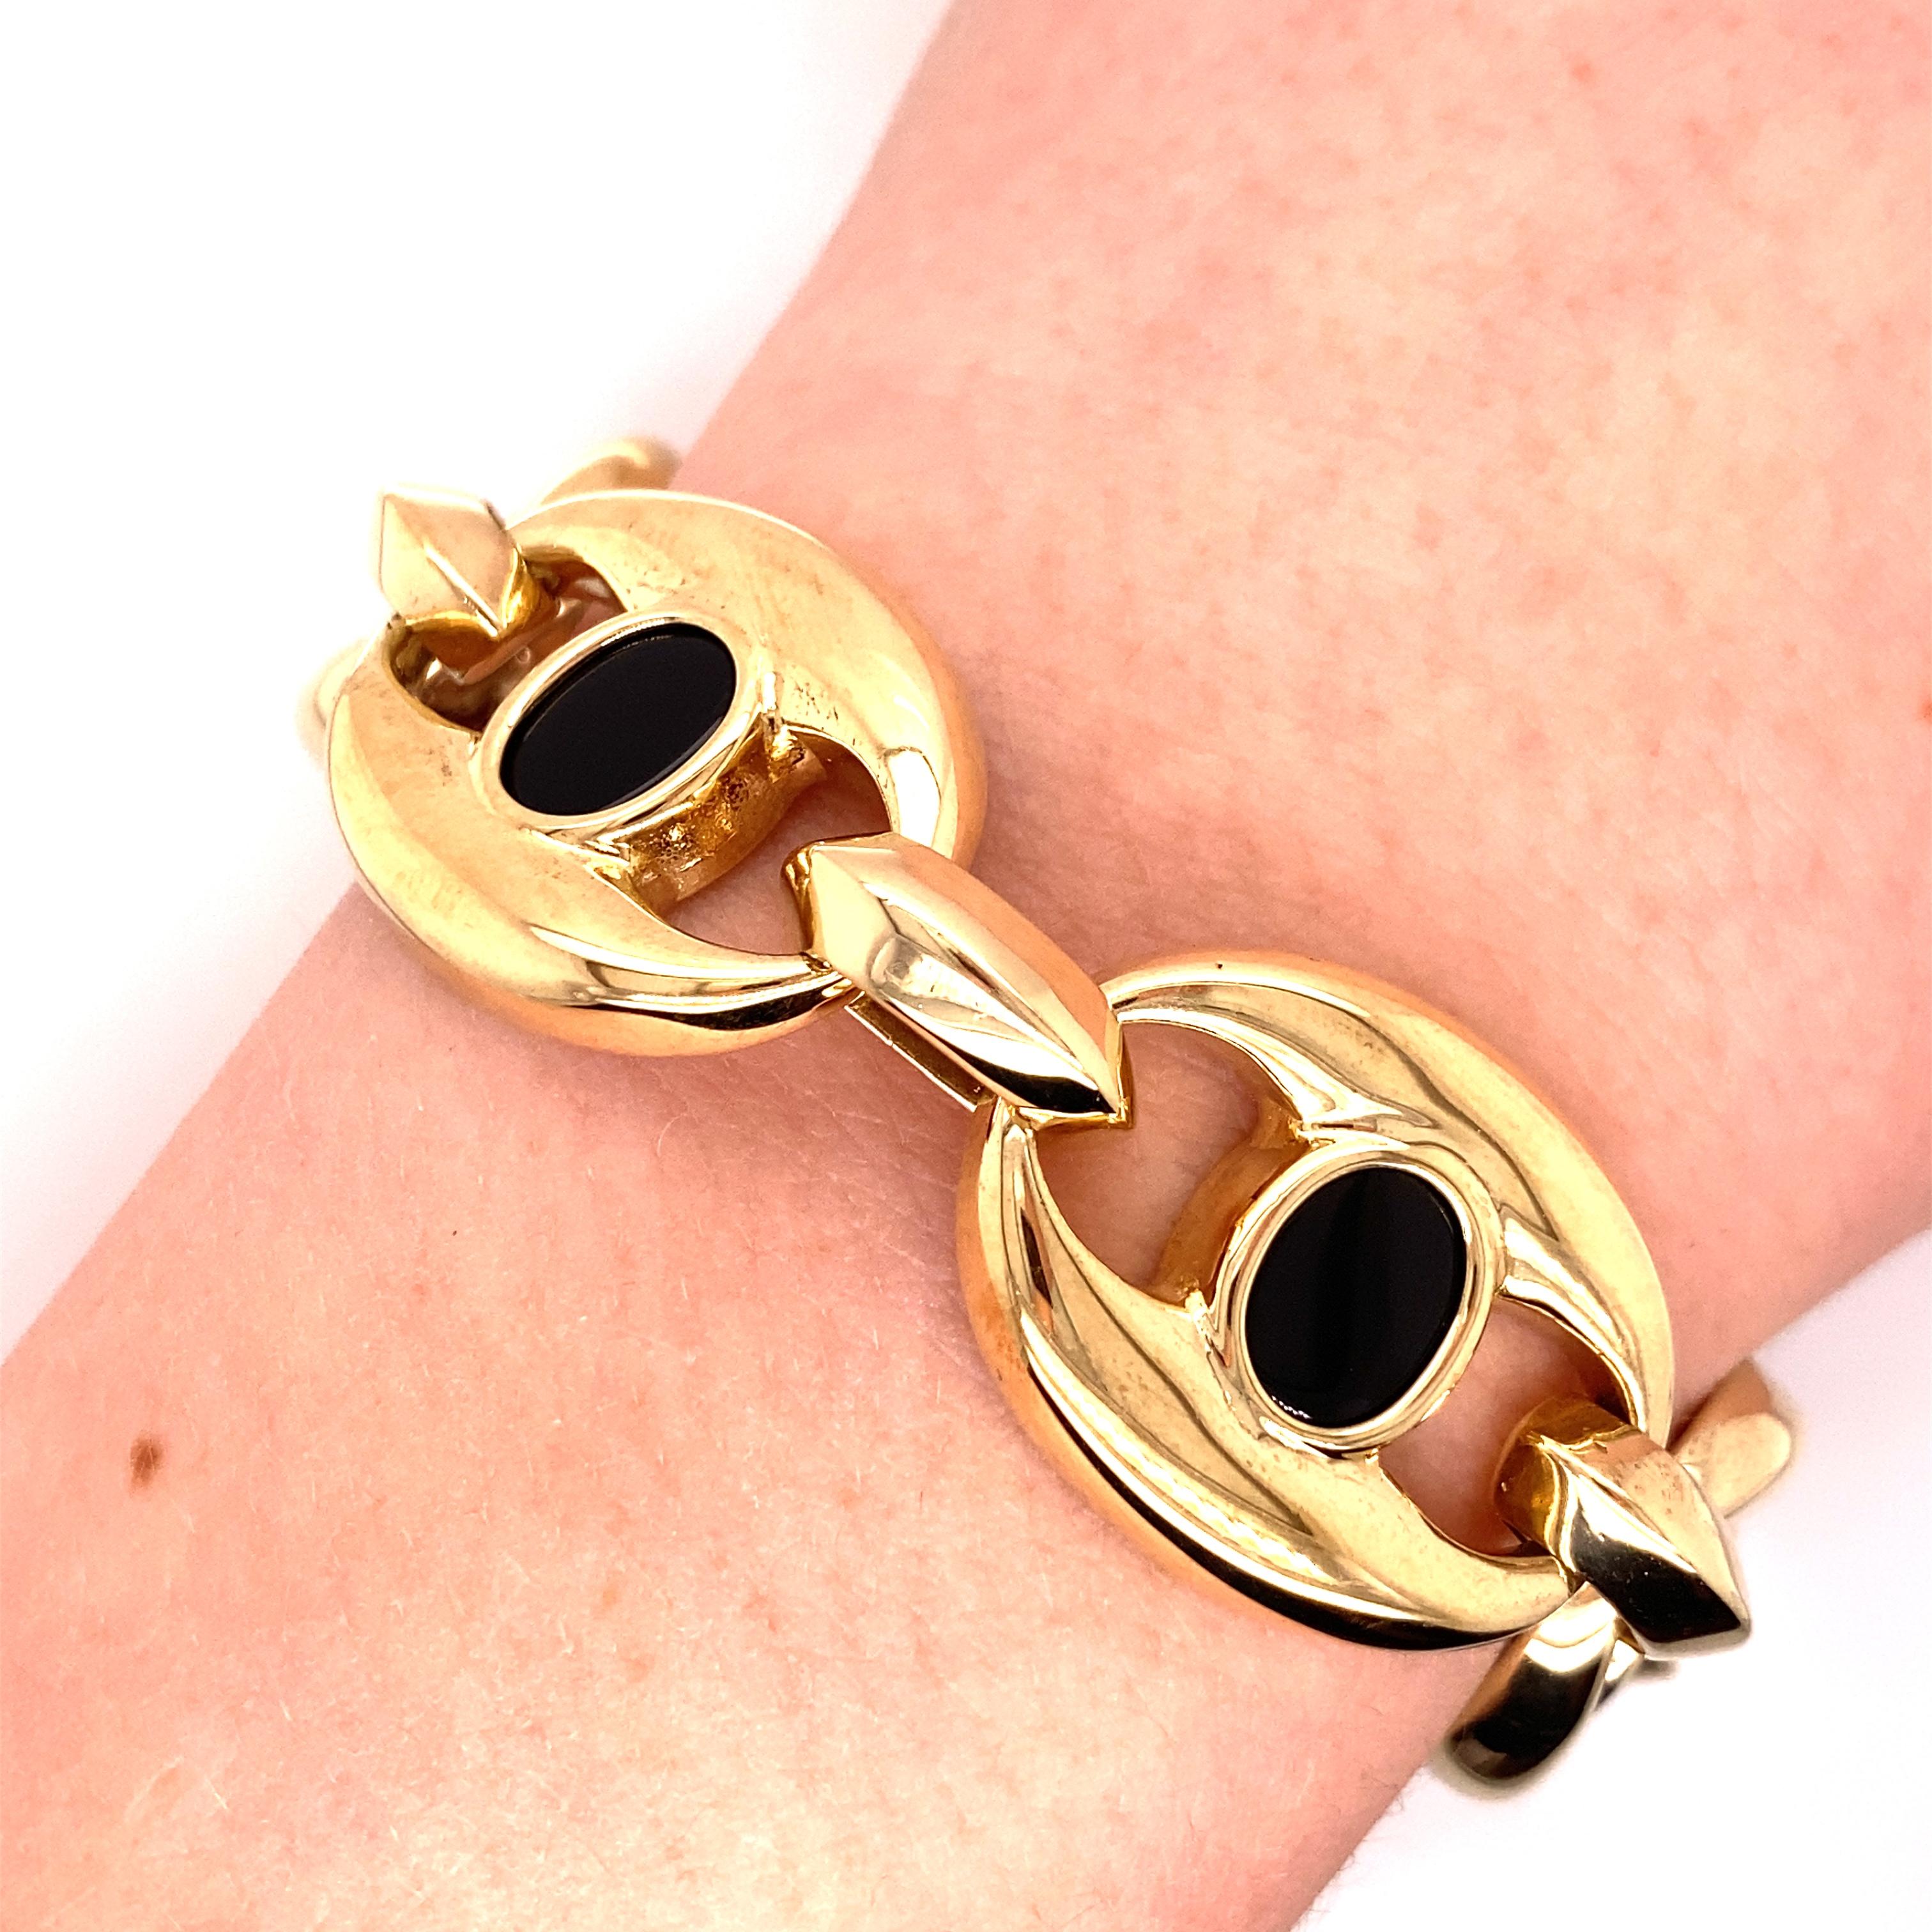 Vintage 1990's 14K Yellow Gold and Onyx Bracelet - The links are casted in solid 14k yellow gold and measure individually 3/4